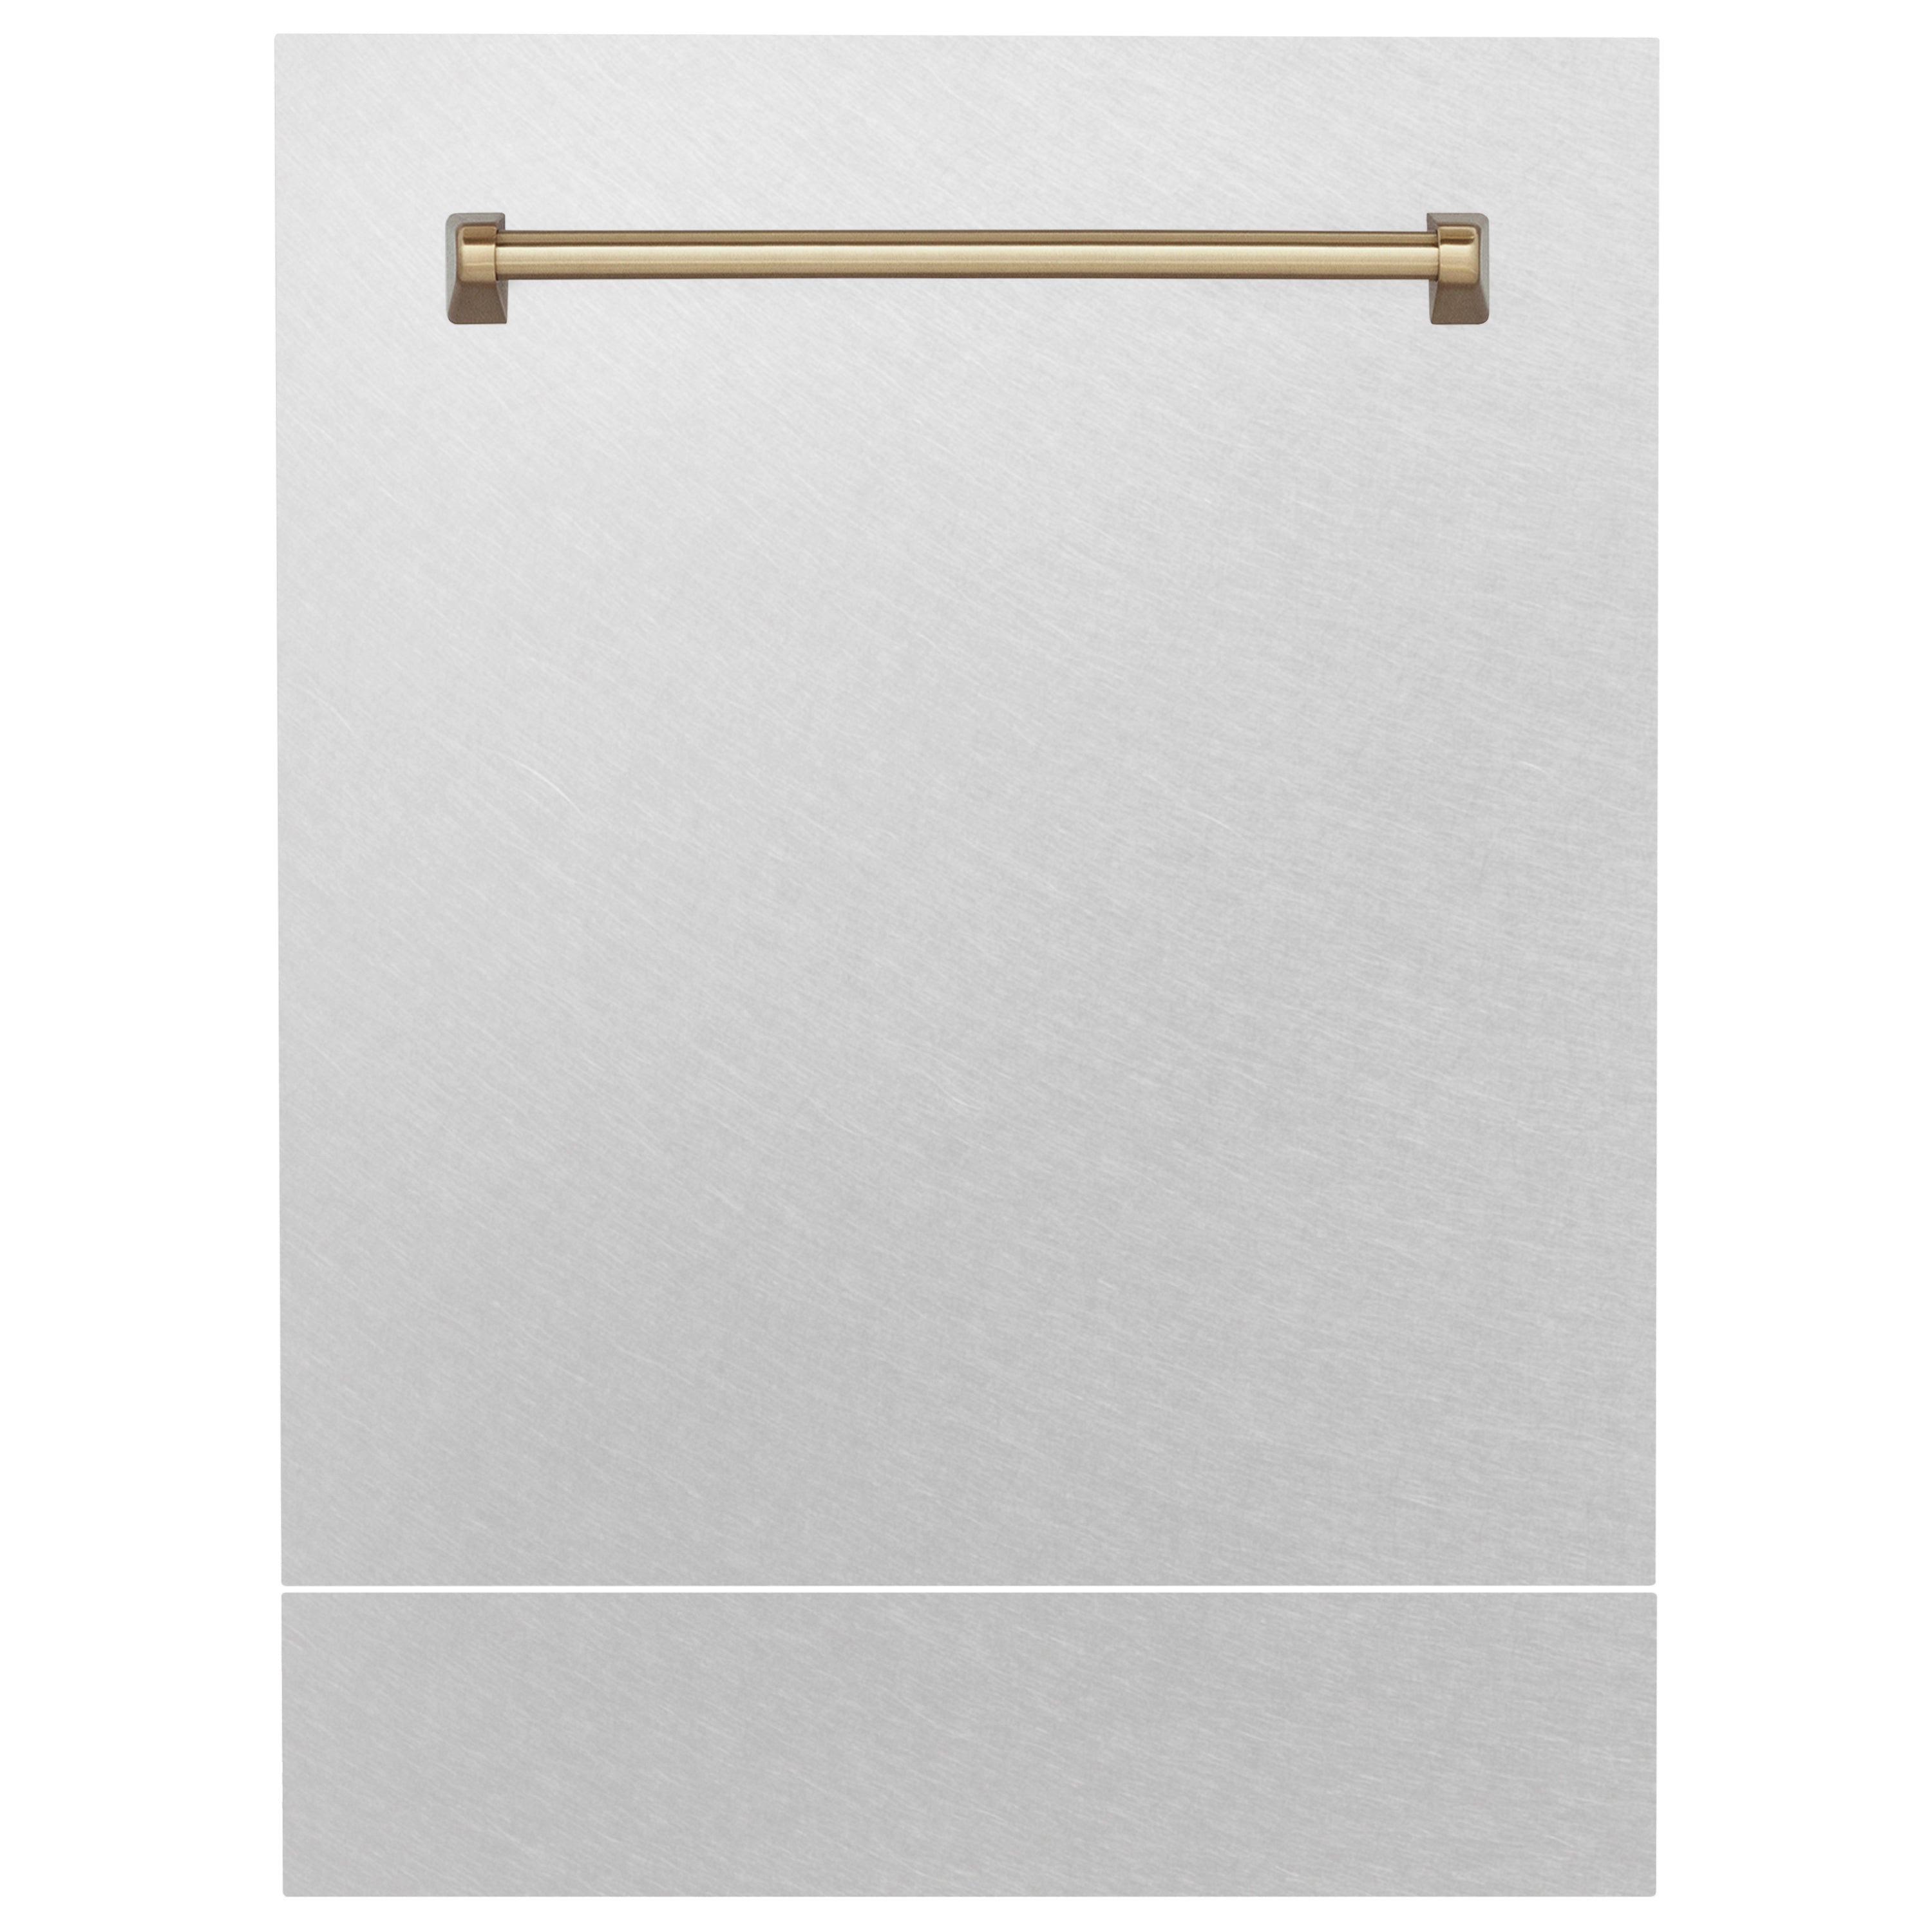 ZLINE 24" Autograph Edition Tallac Dishwasher Panel in Fingerprint Resistant Stainless Steel with Champagne Bronze Handle (DPVZ-SN-24-CB)